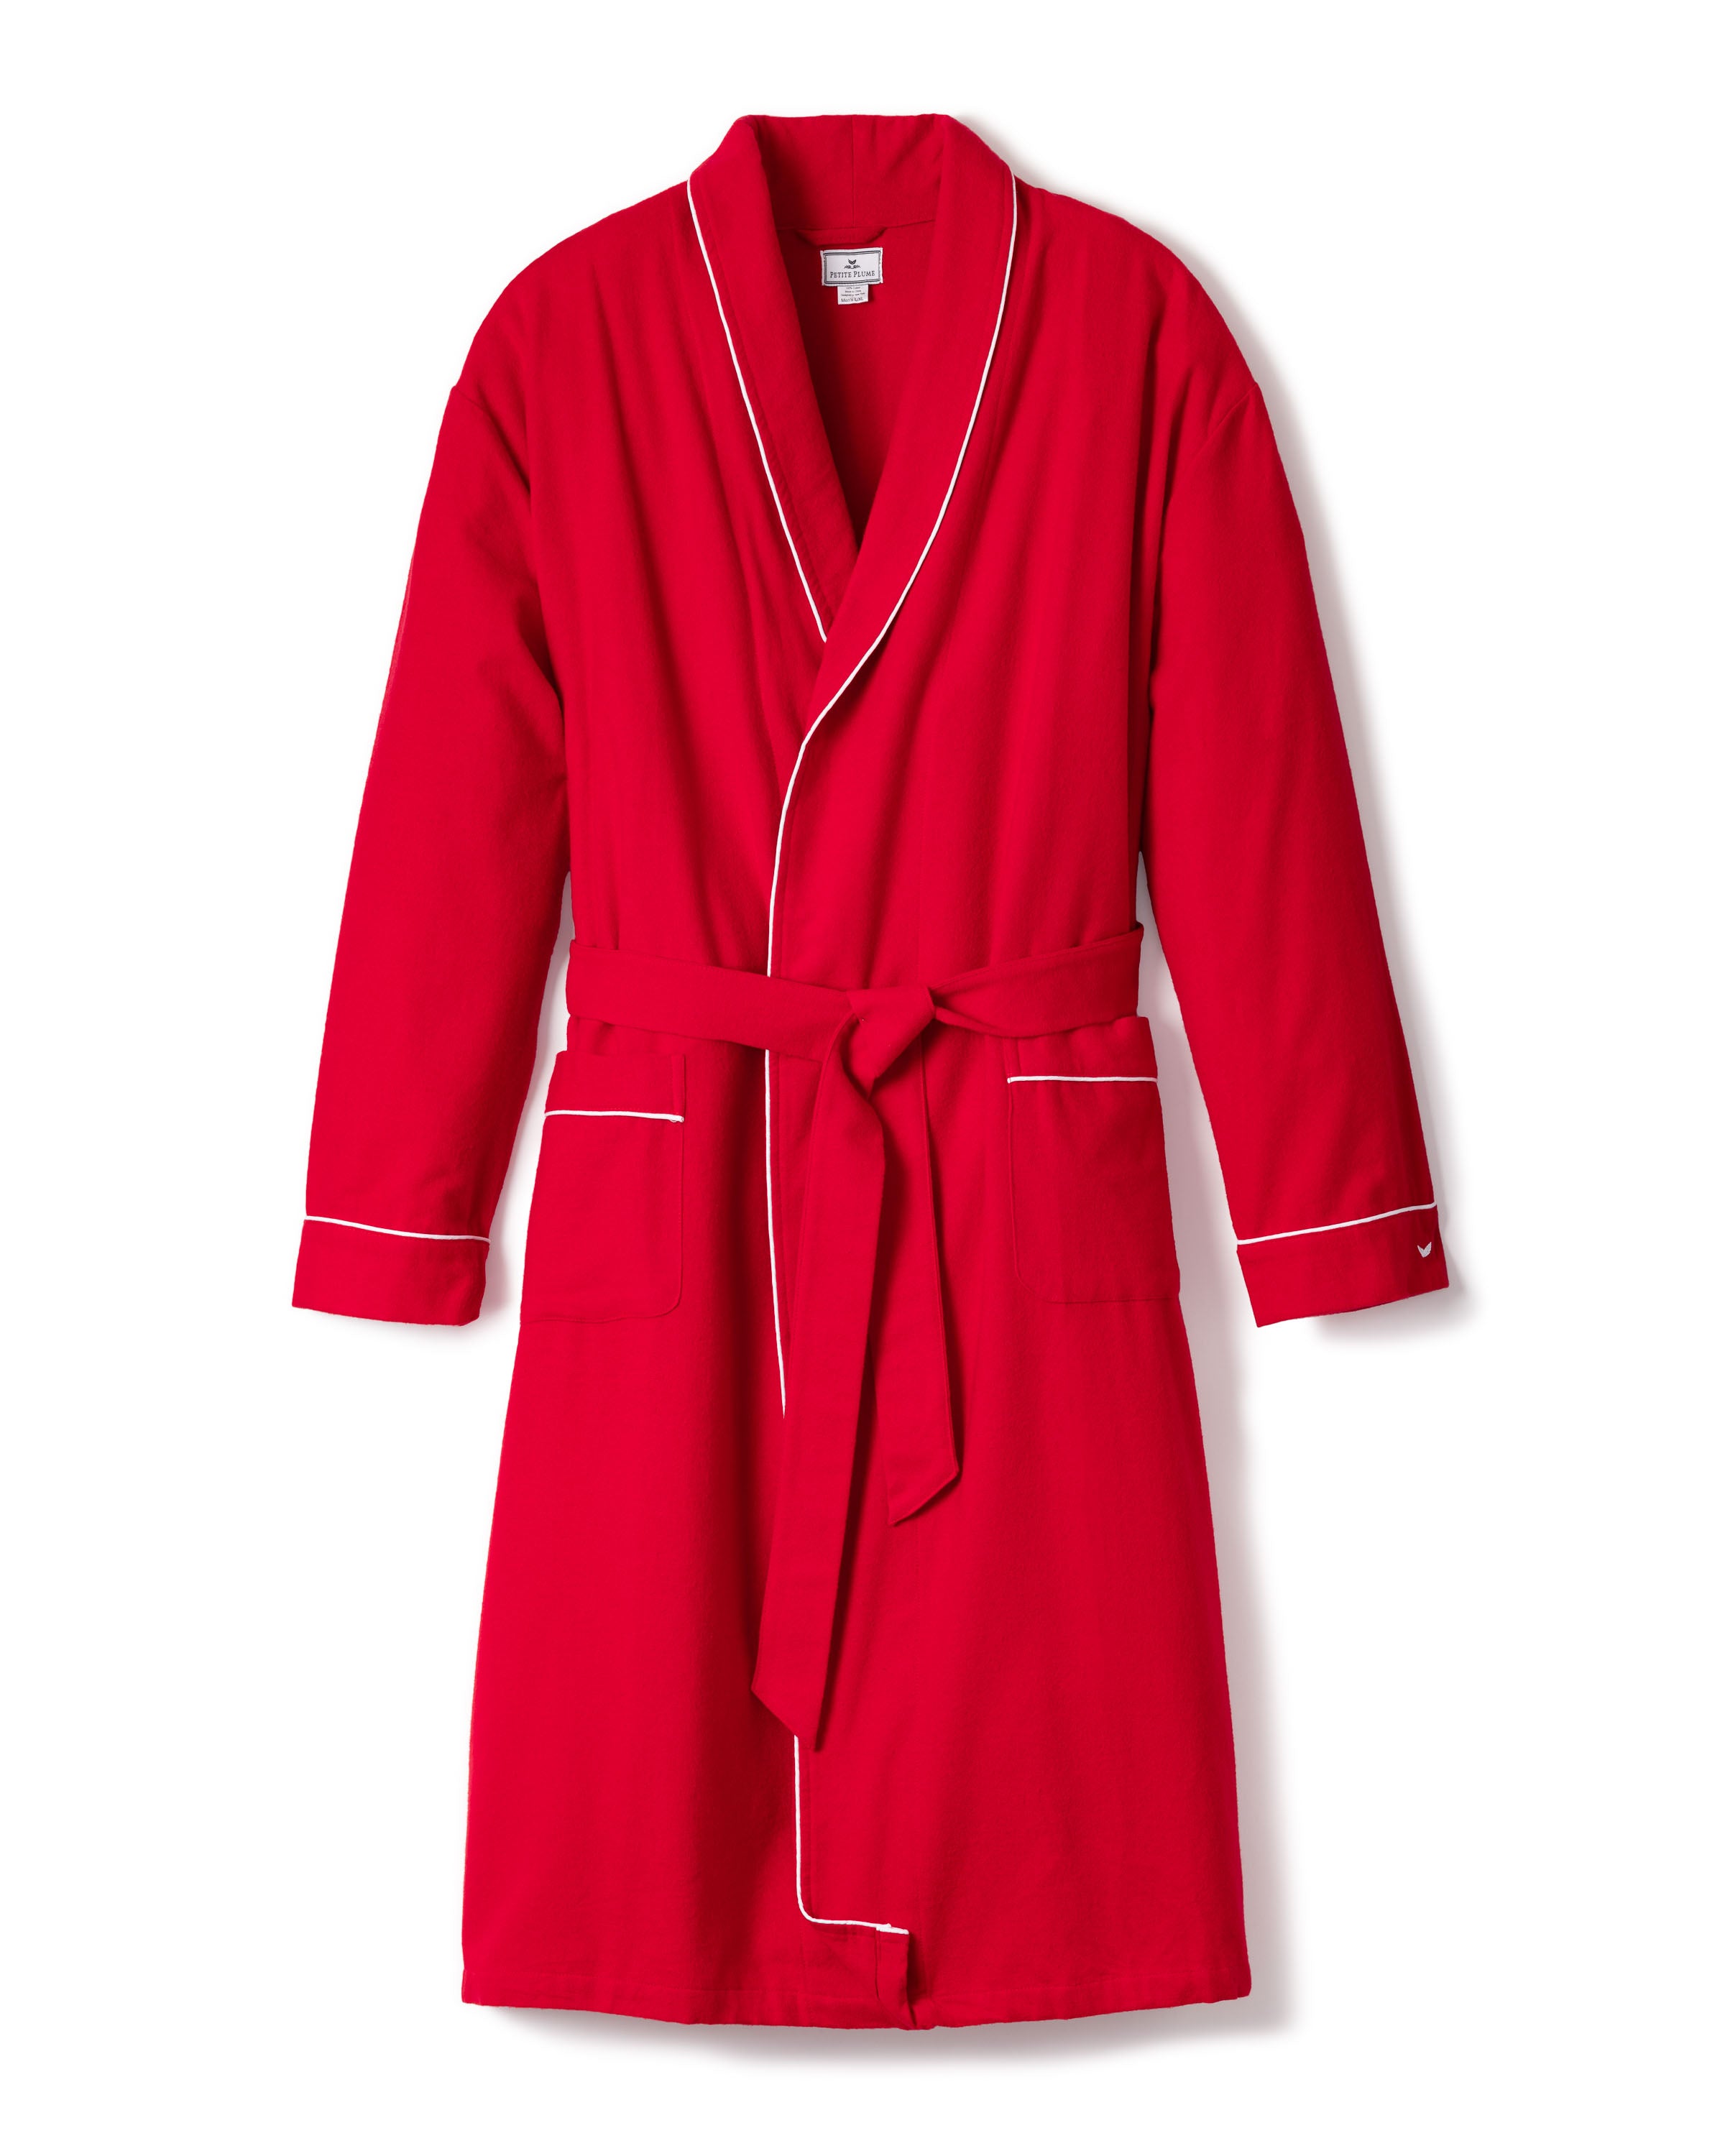 Men's Flannel Robe in Red with White Piping